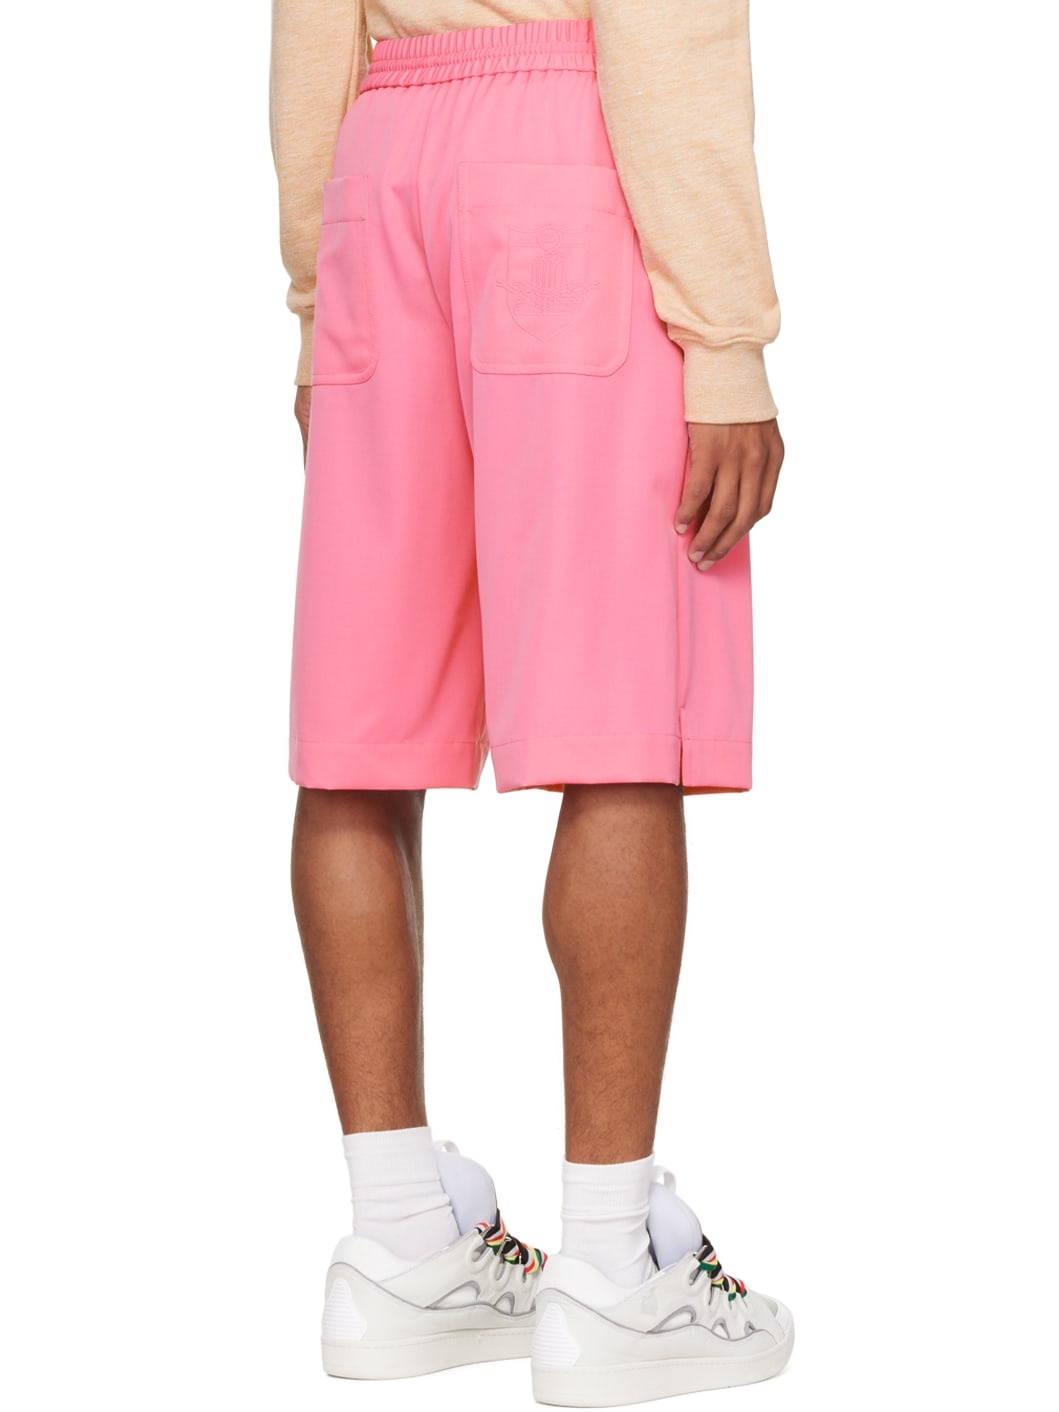 Pink Embroidered Shorts - 3